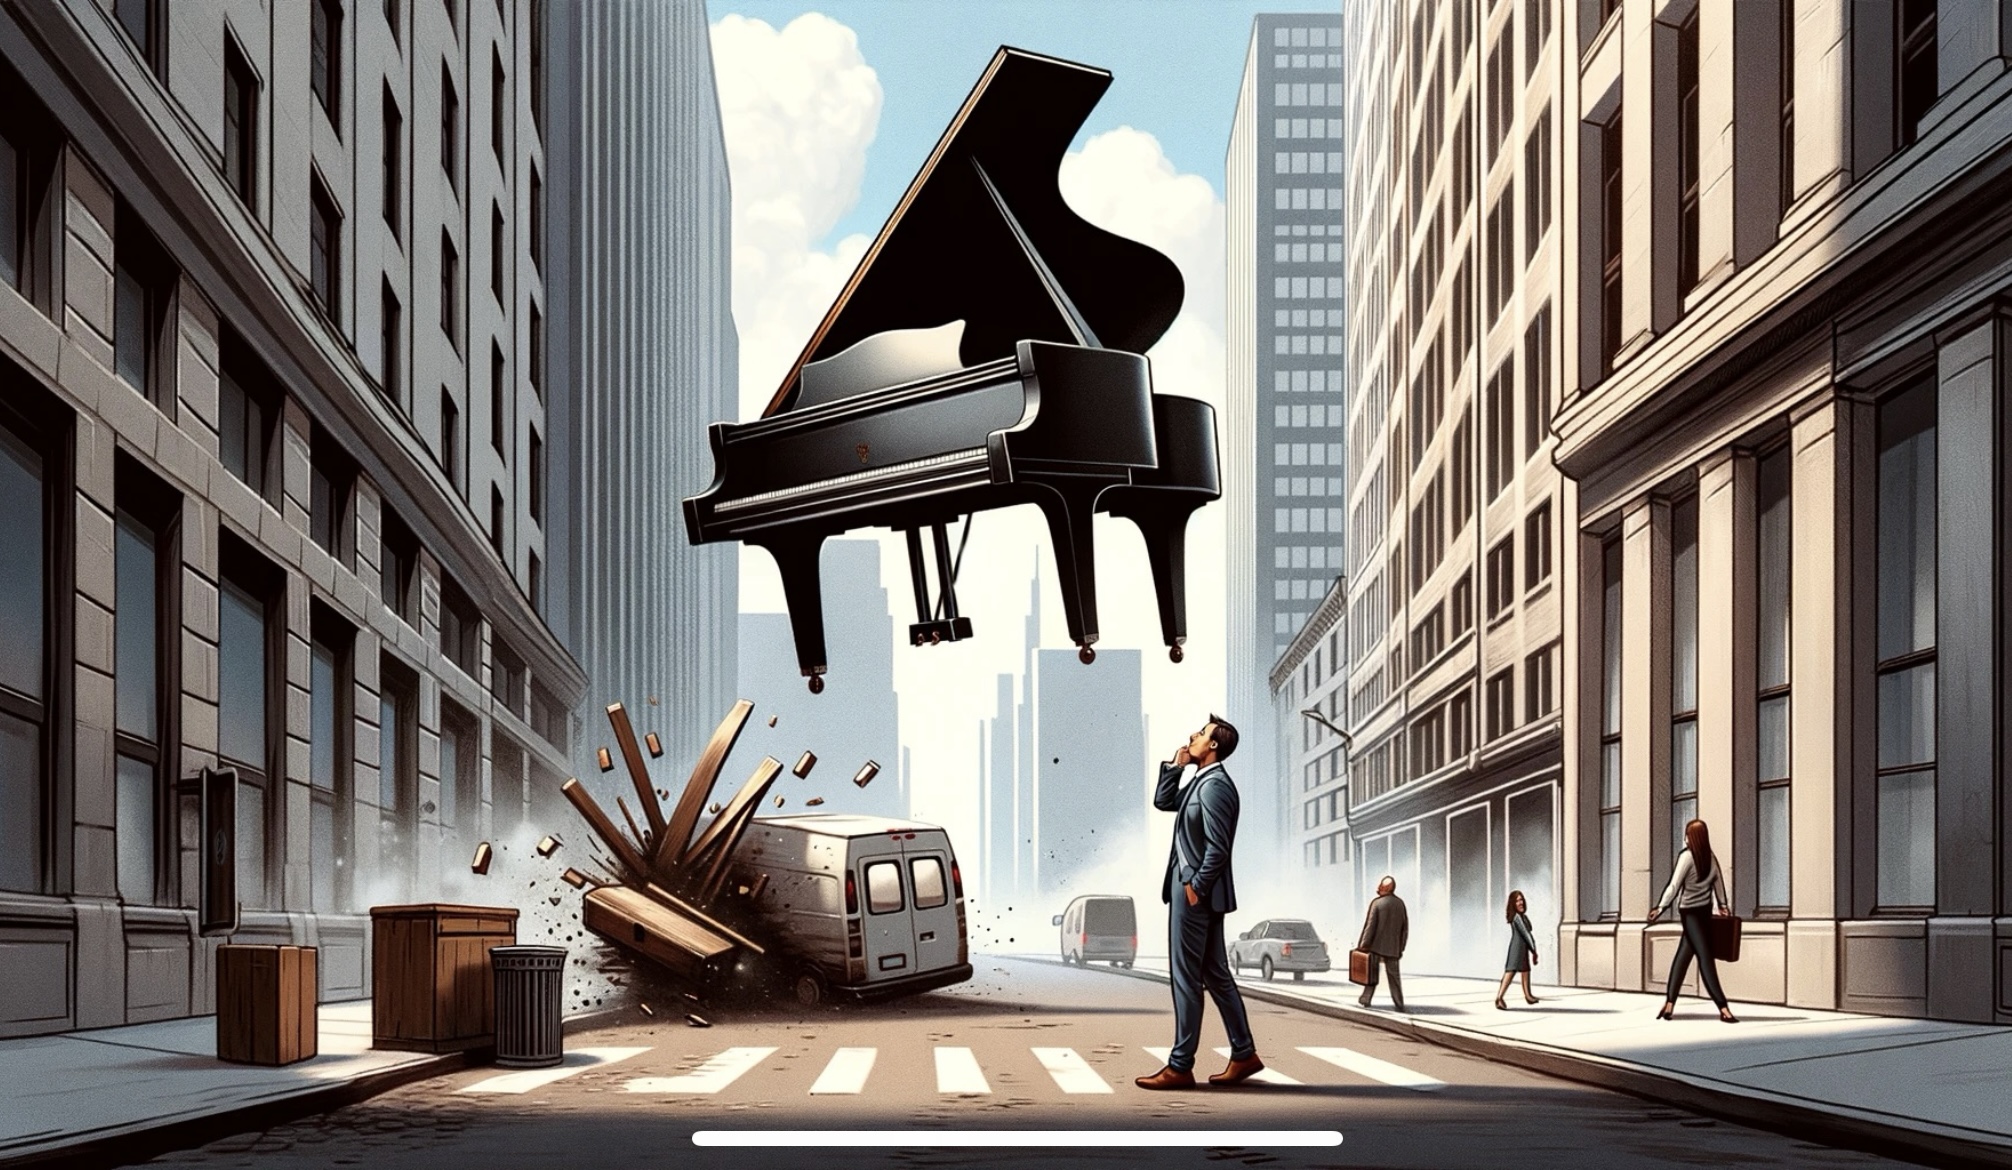 A piano falling on an unsuspecting man, repeating irony. 